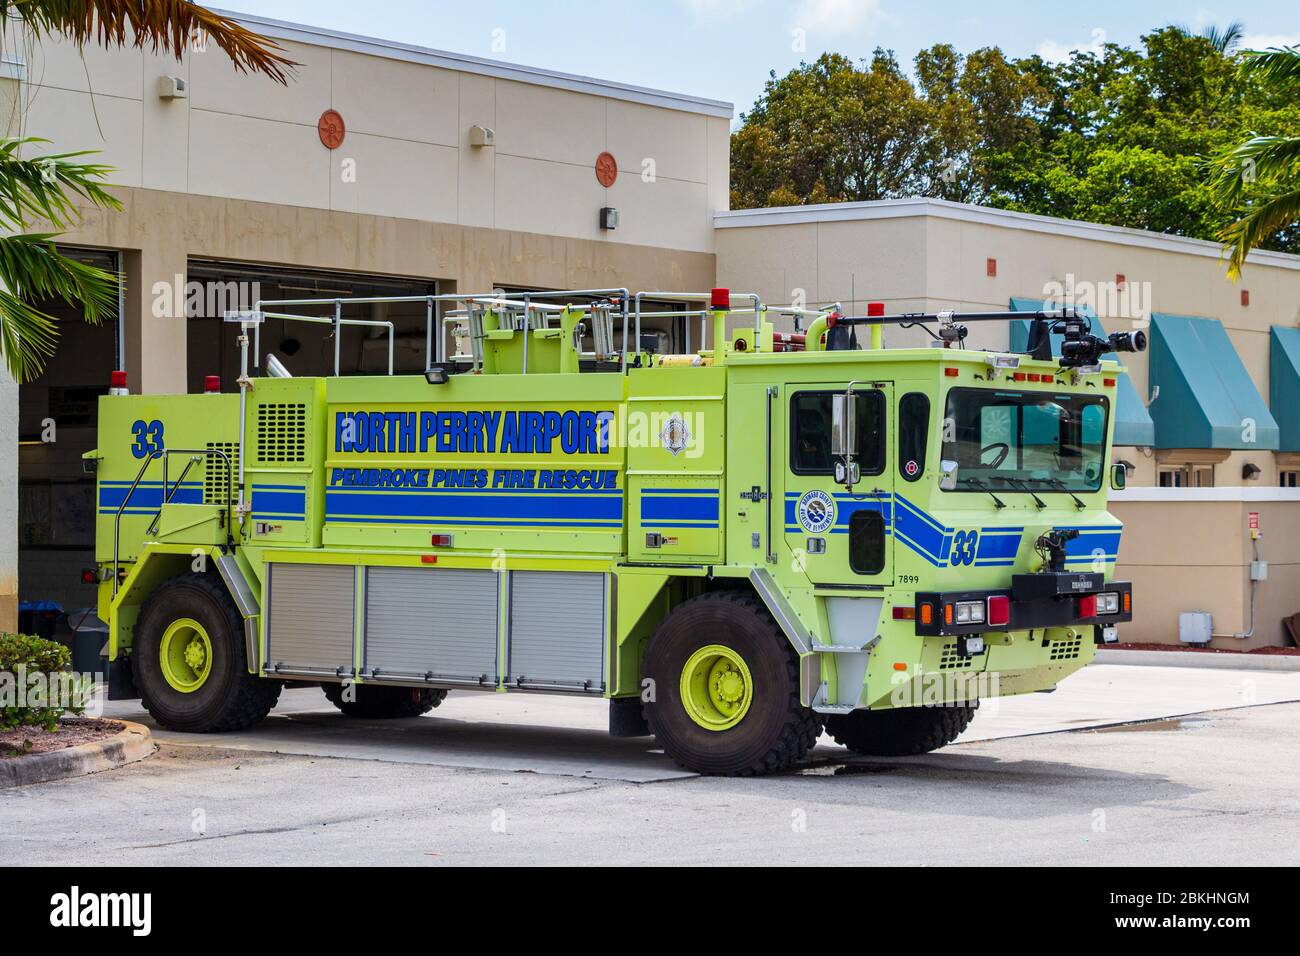 North Perry Airport Pembroke Pines Fire Rescue truck parked outside Station 33 - Pembroke Pines, Florida, USA Stock Photo